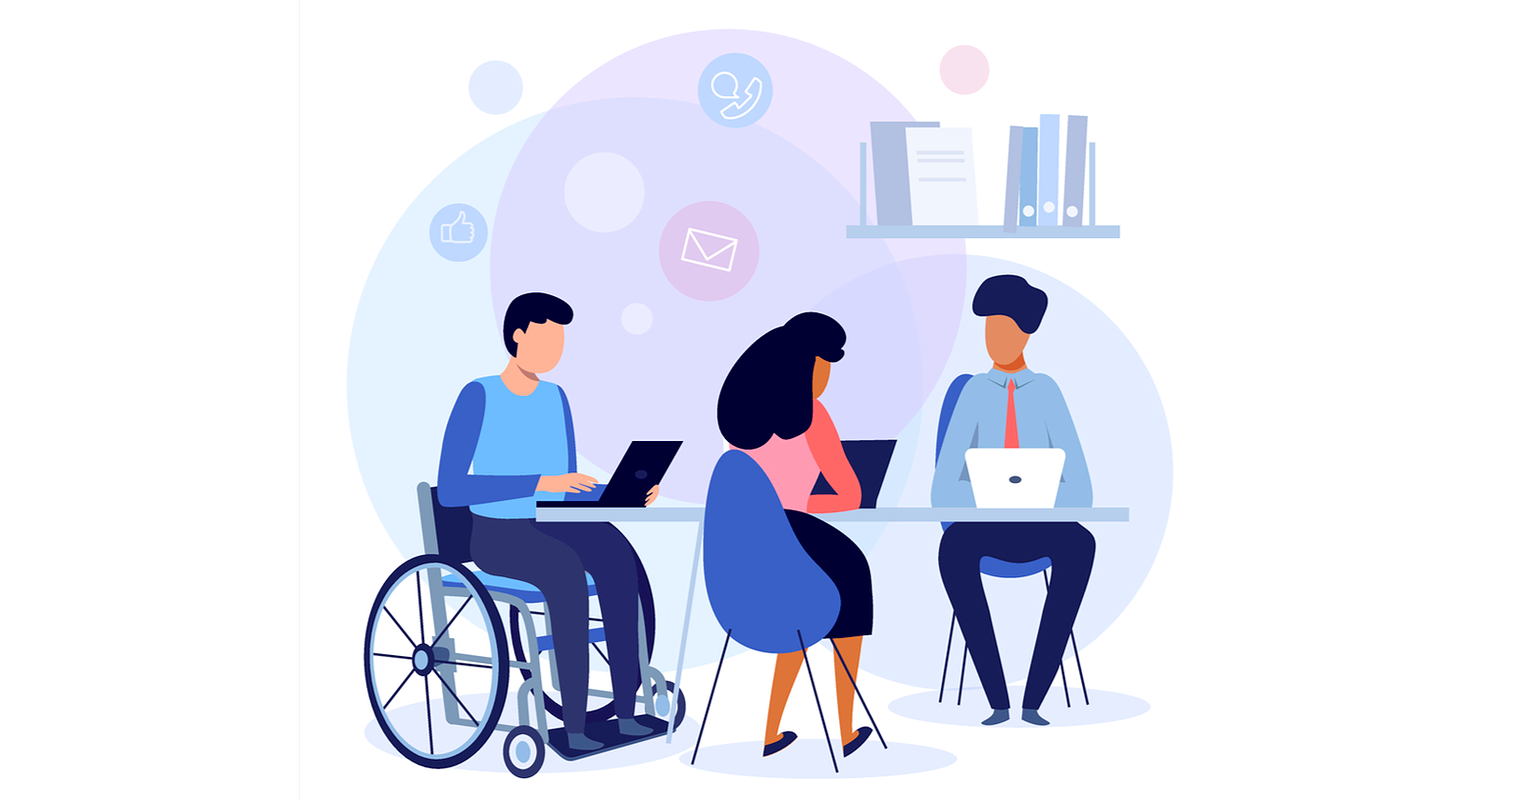 Practical Tips for Accessibility, Search & Human Experience Design